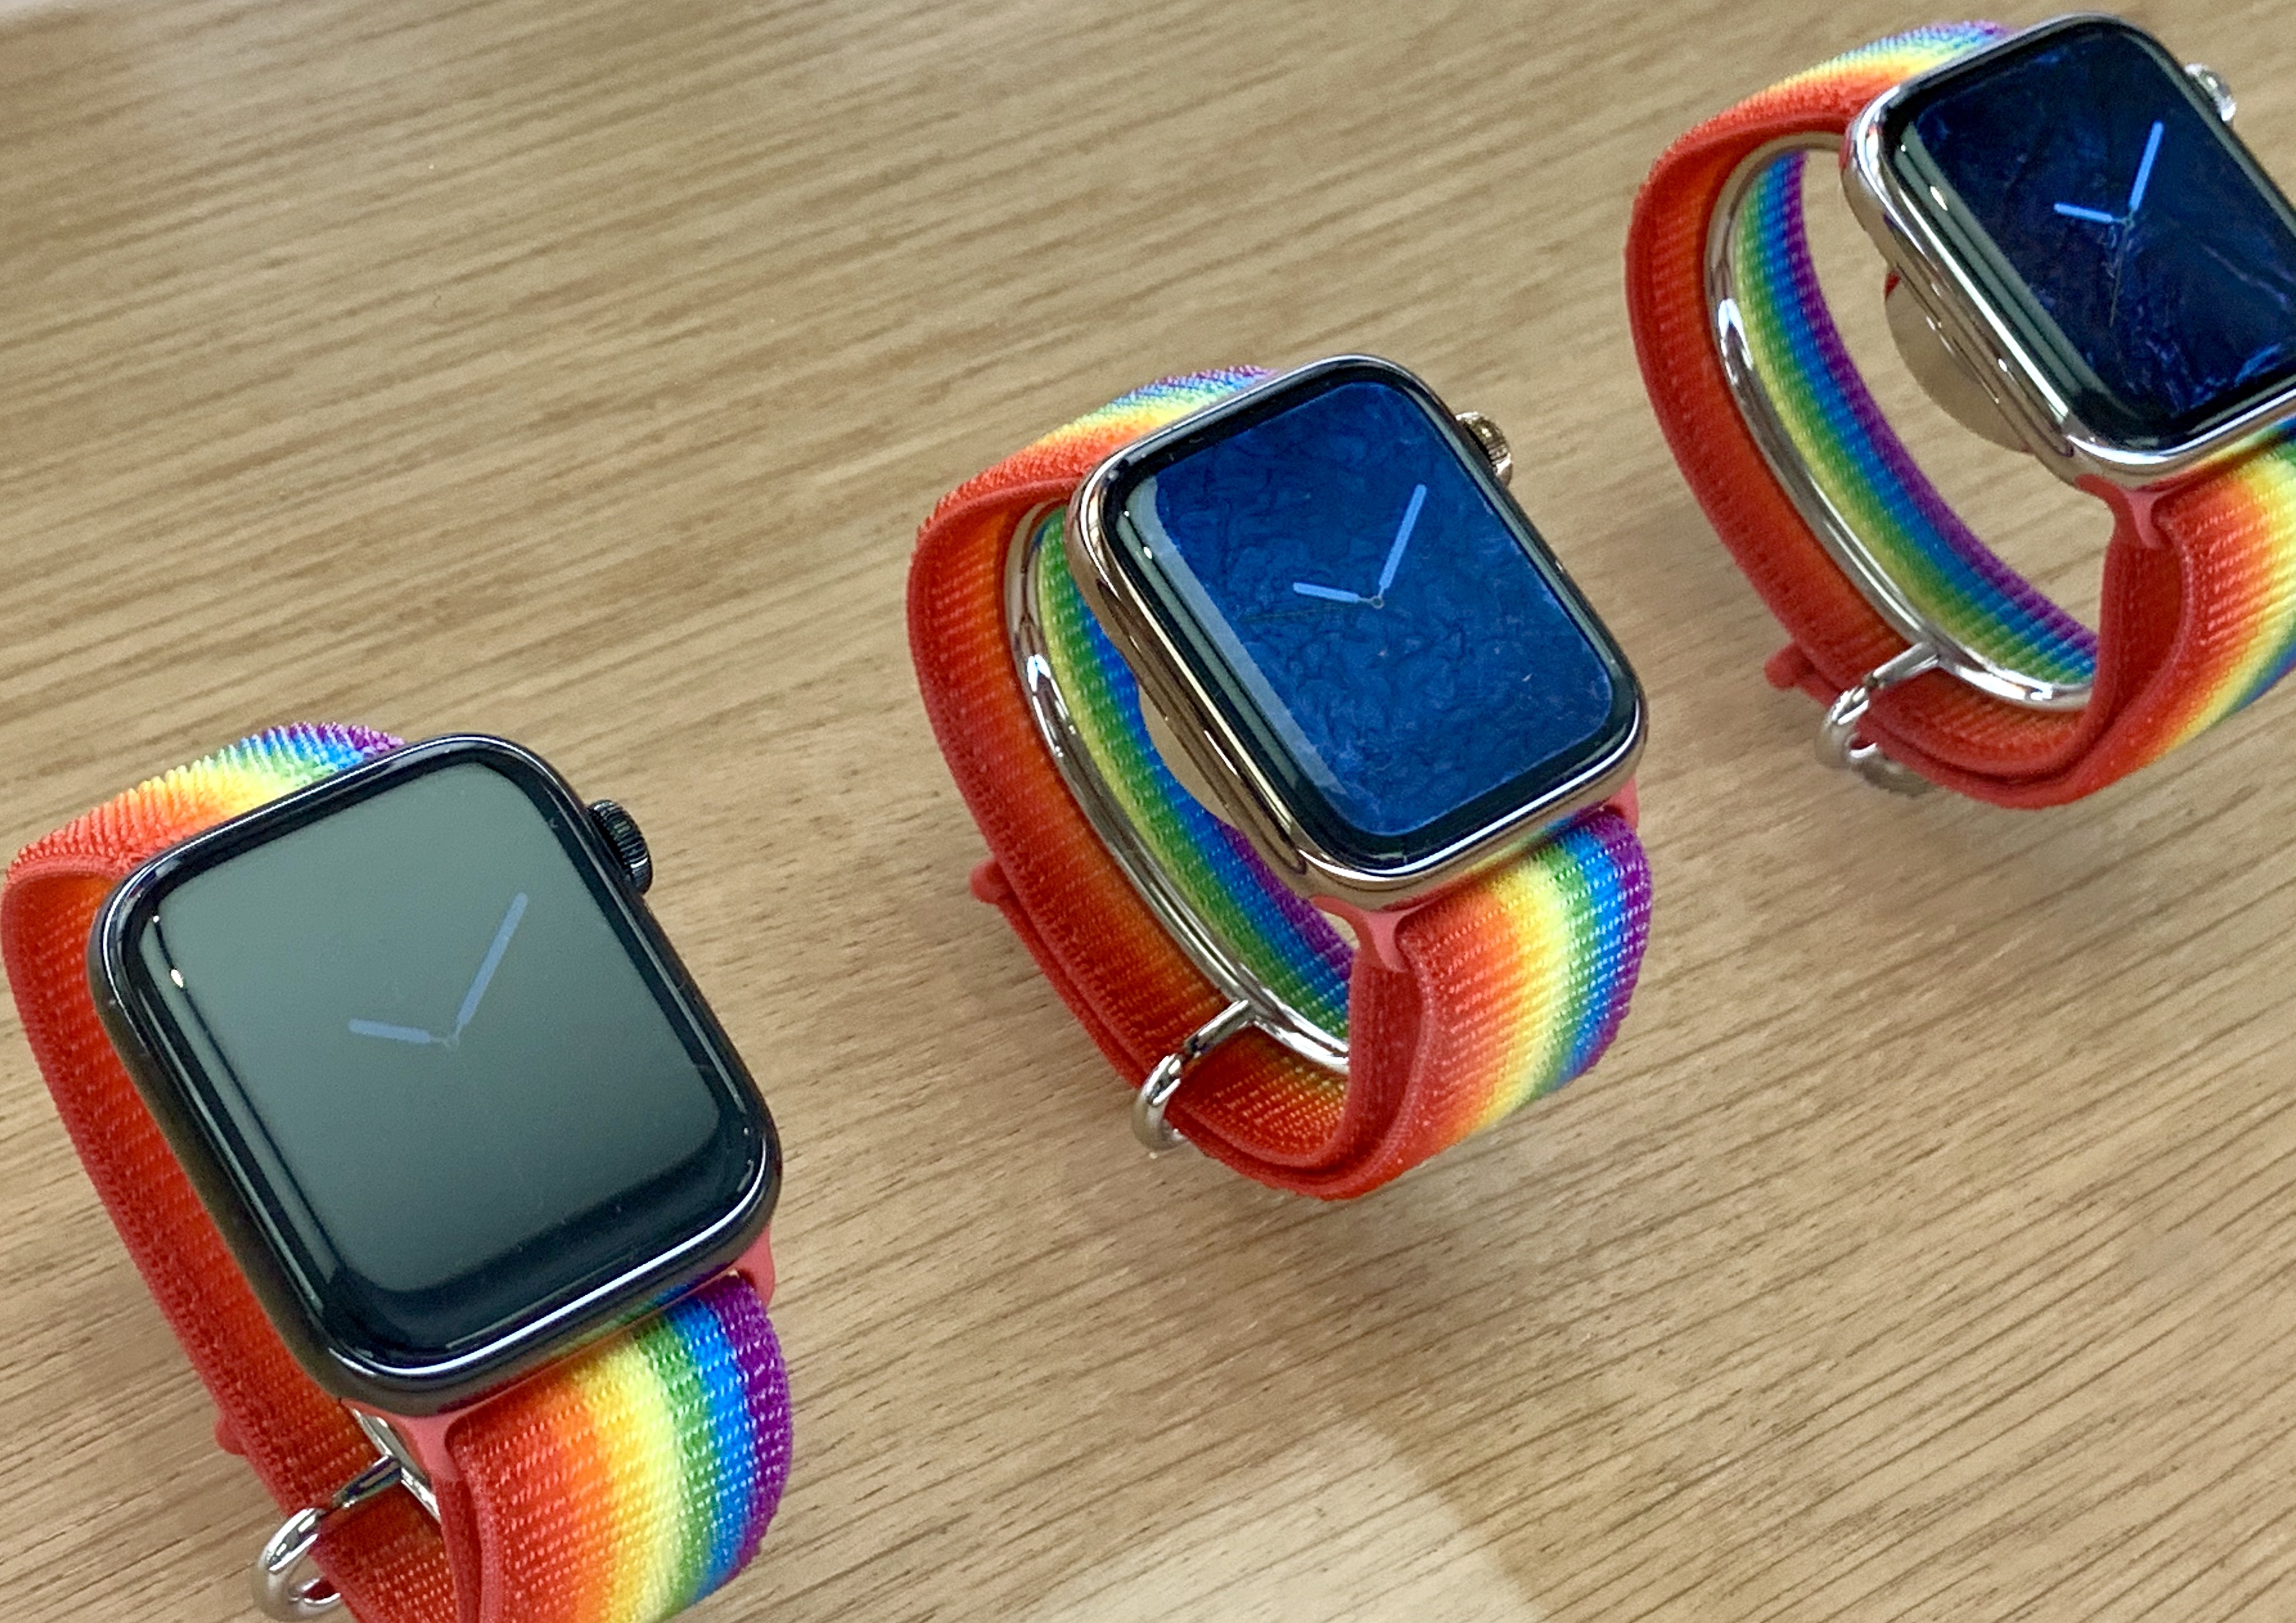 Pride Sport Loop hands-on with new 